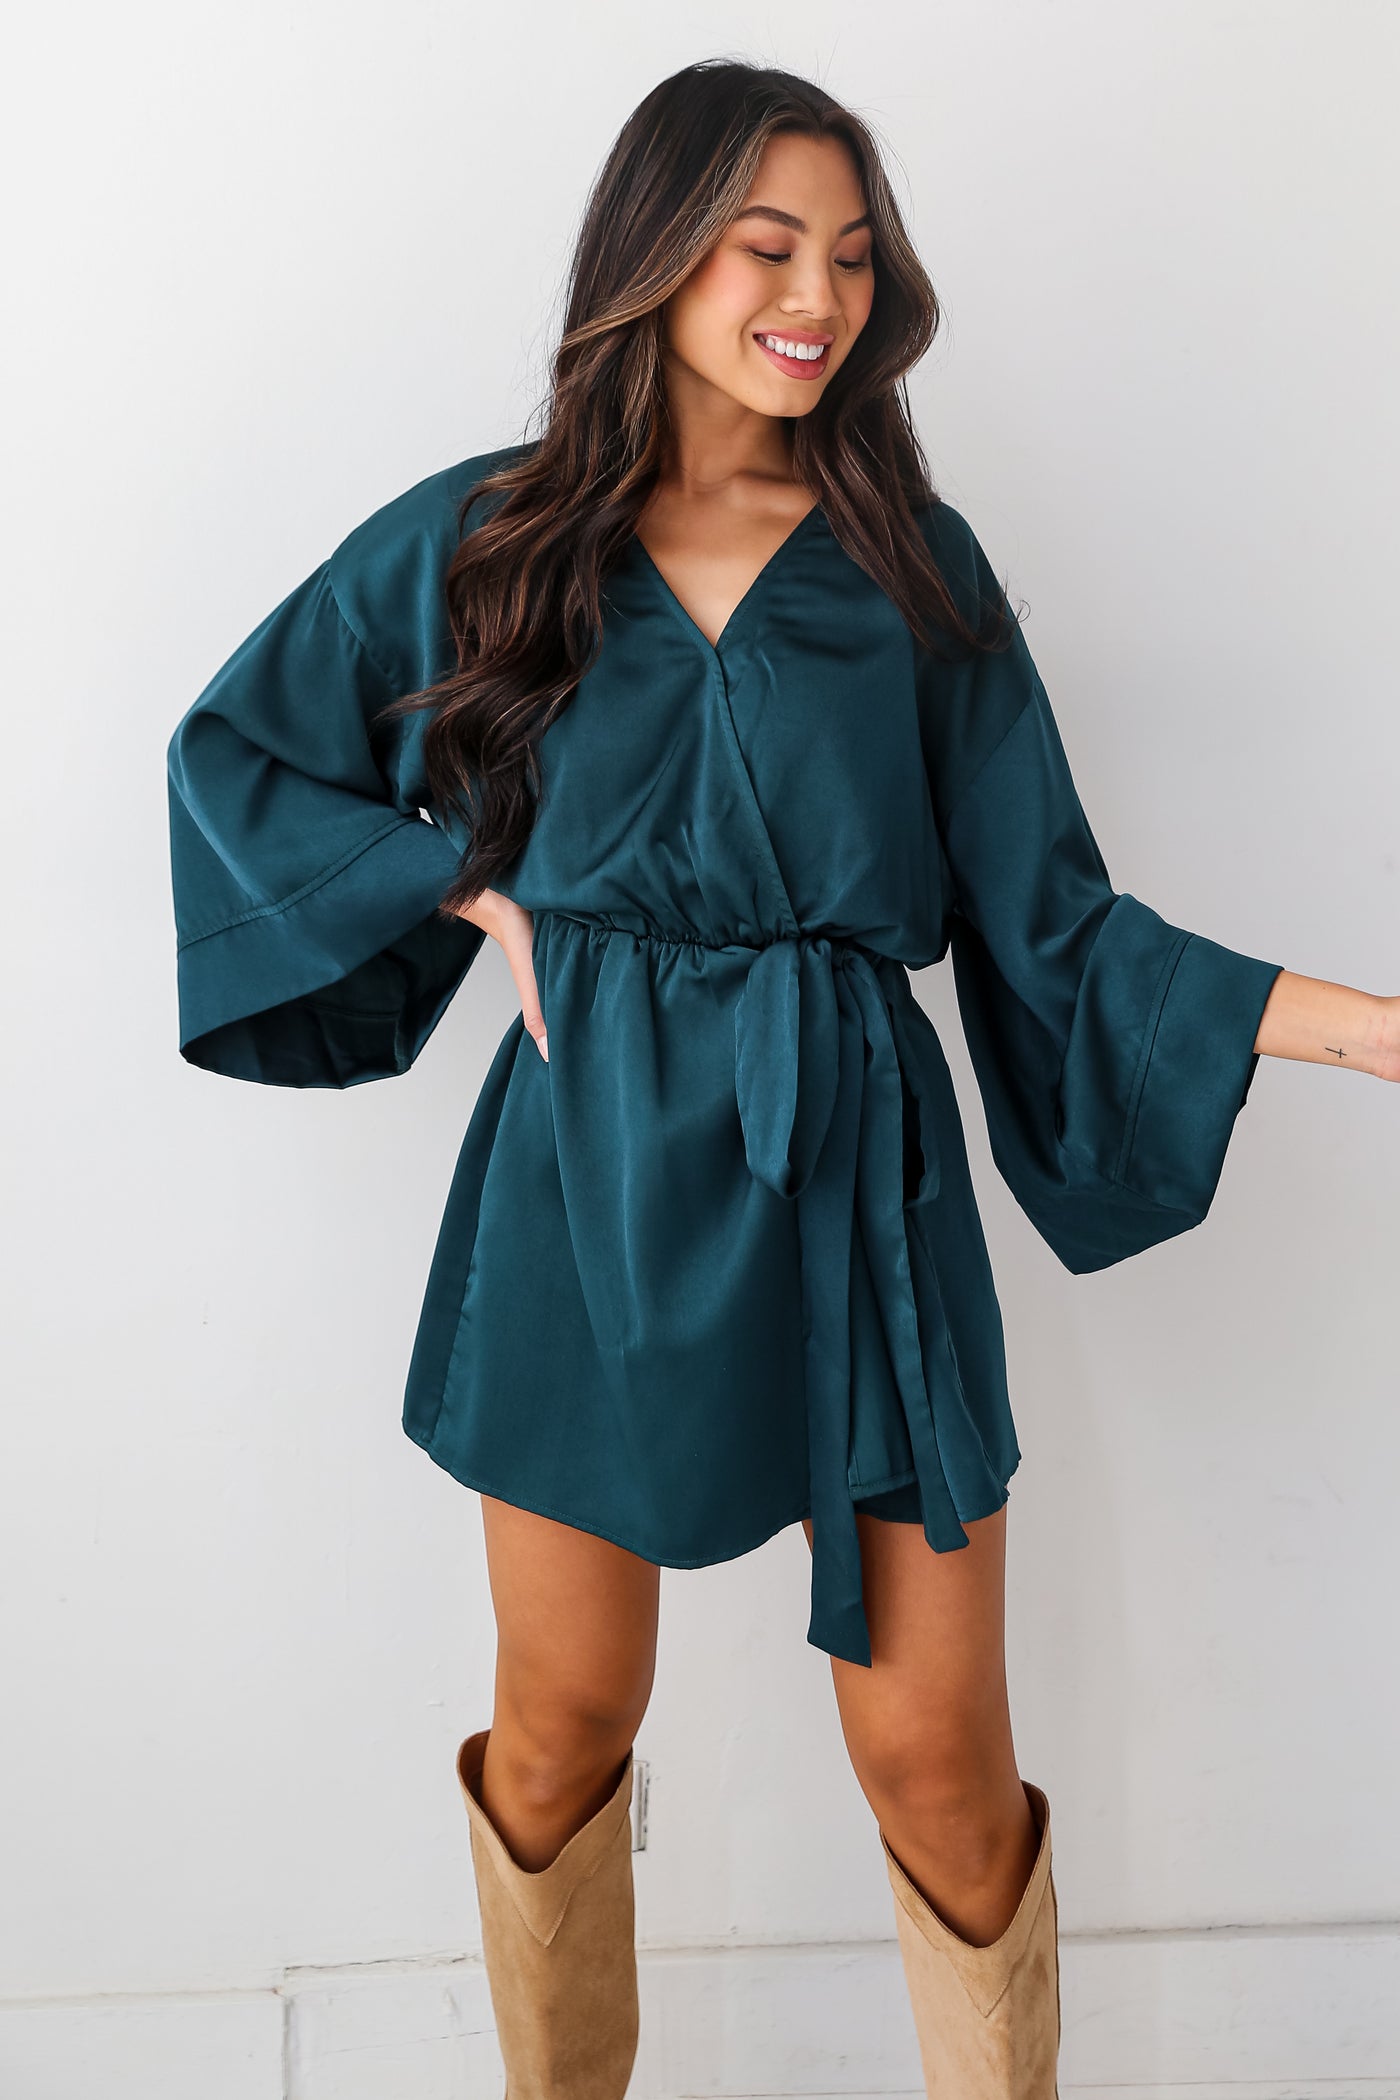 Hunter Green Satin Romper front view